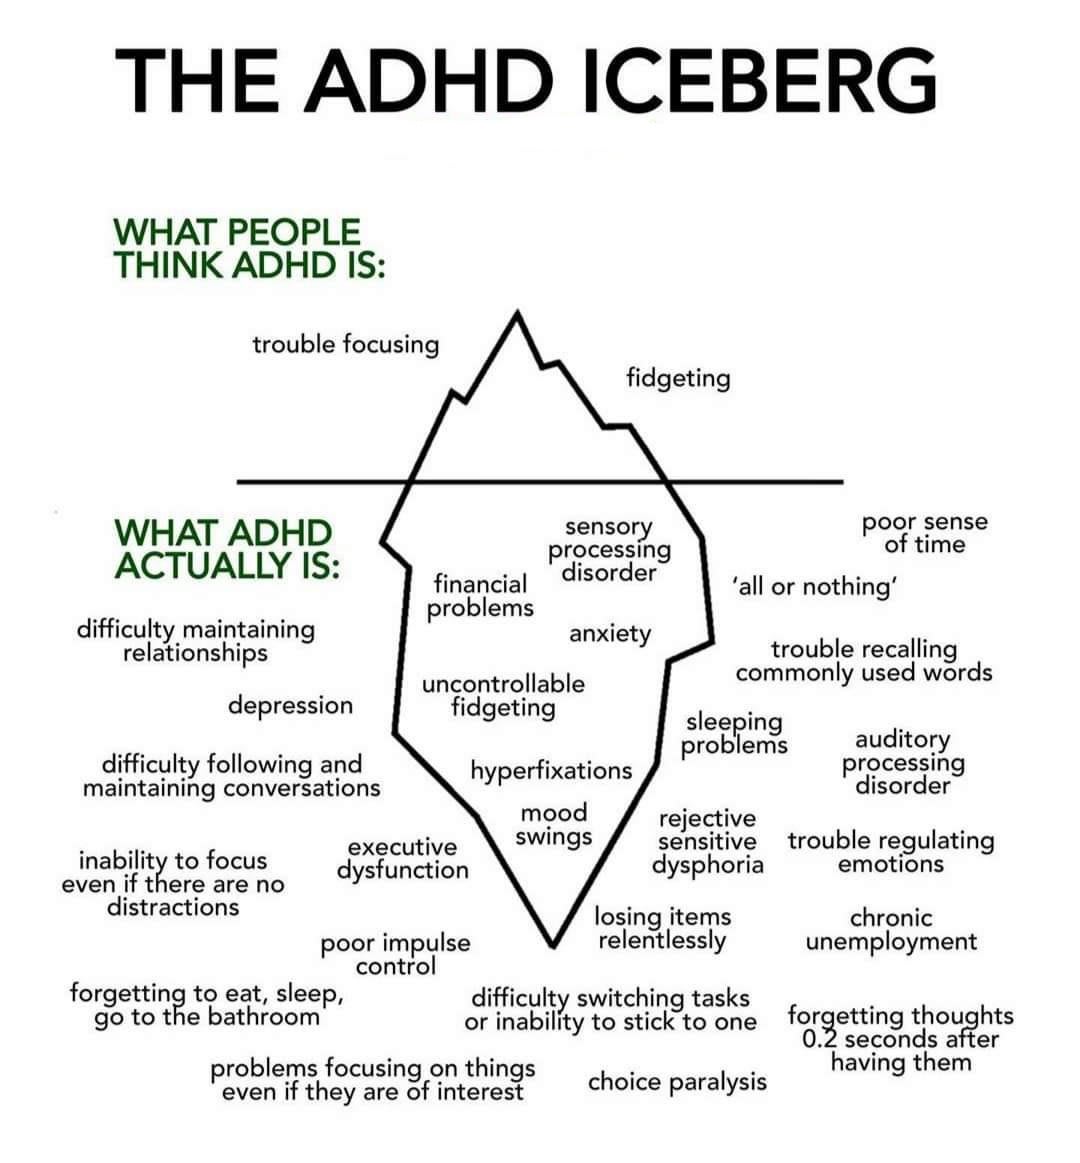 ADHD is more than just bring unable to focus.